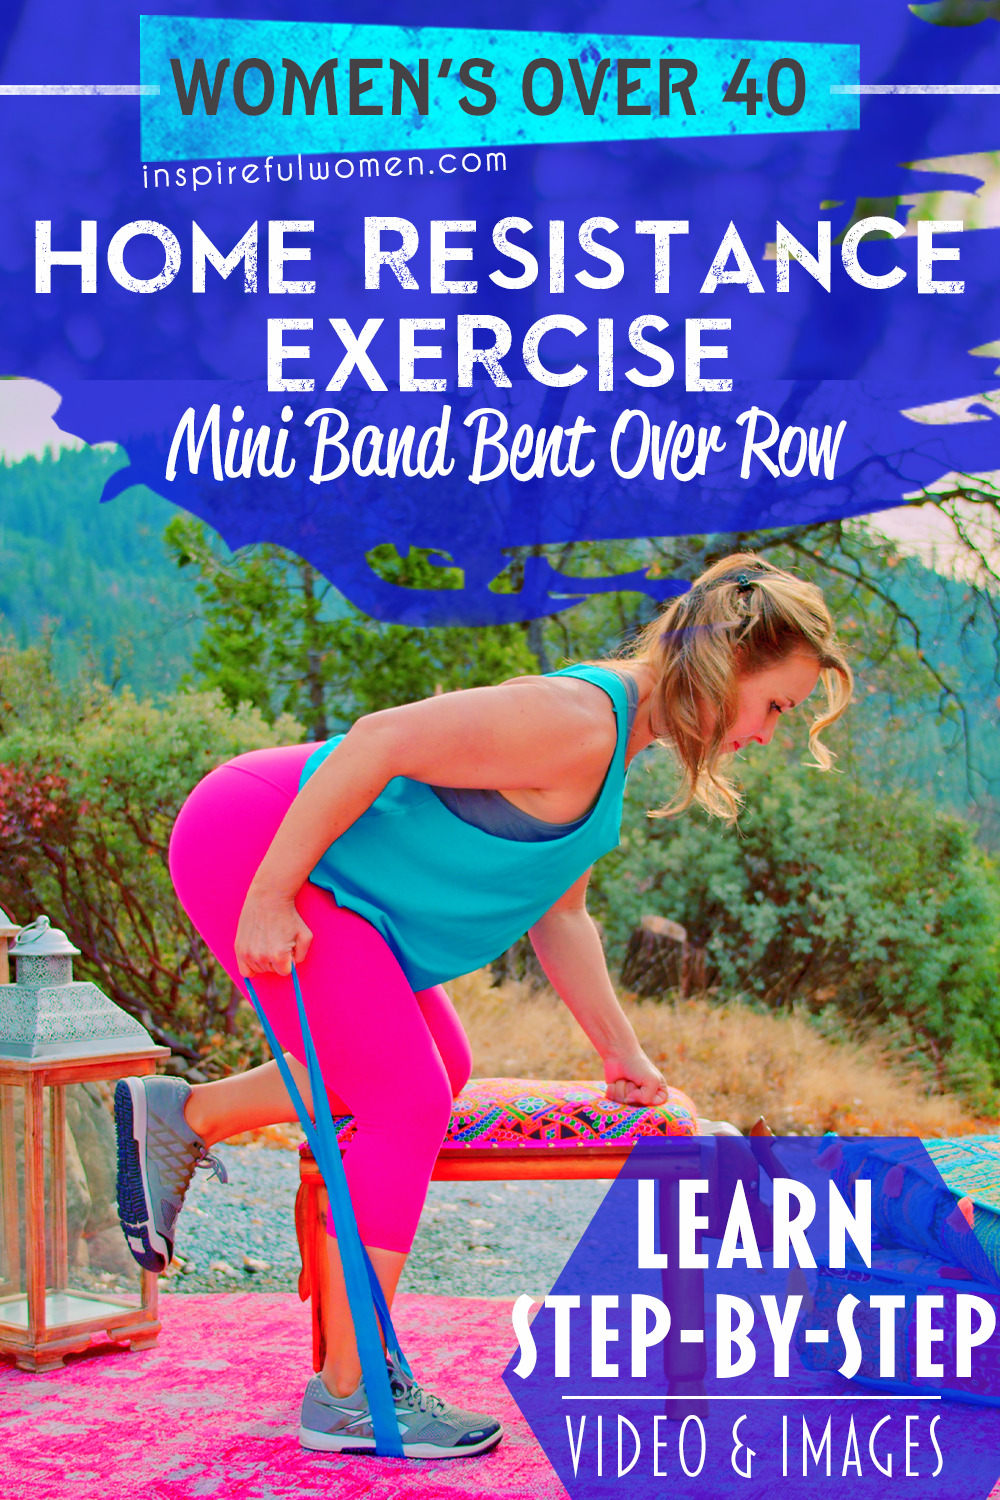 mini-band-bent-over-row-one-arm-row-resistance-exercise-women-over-40